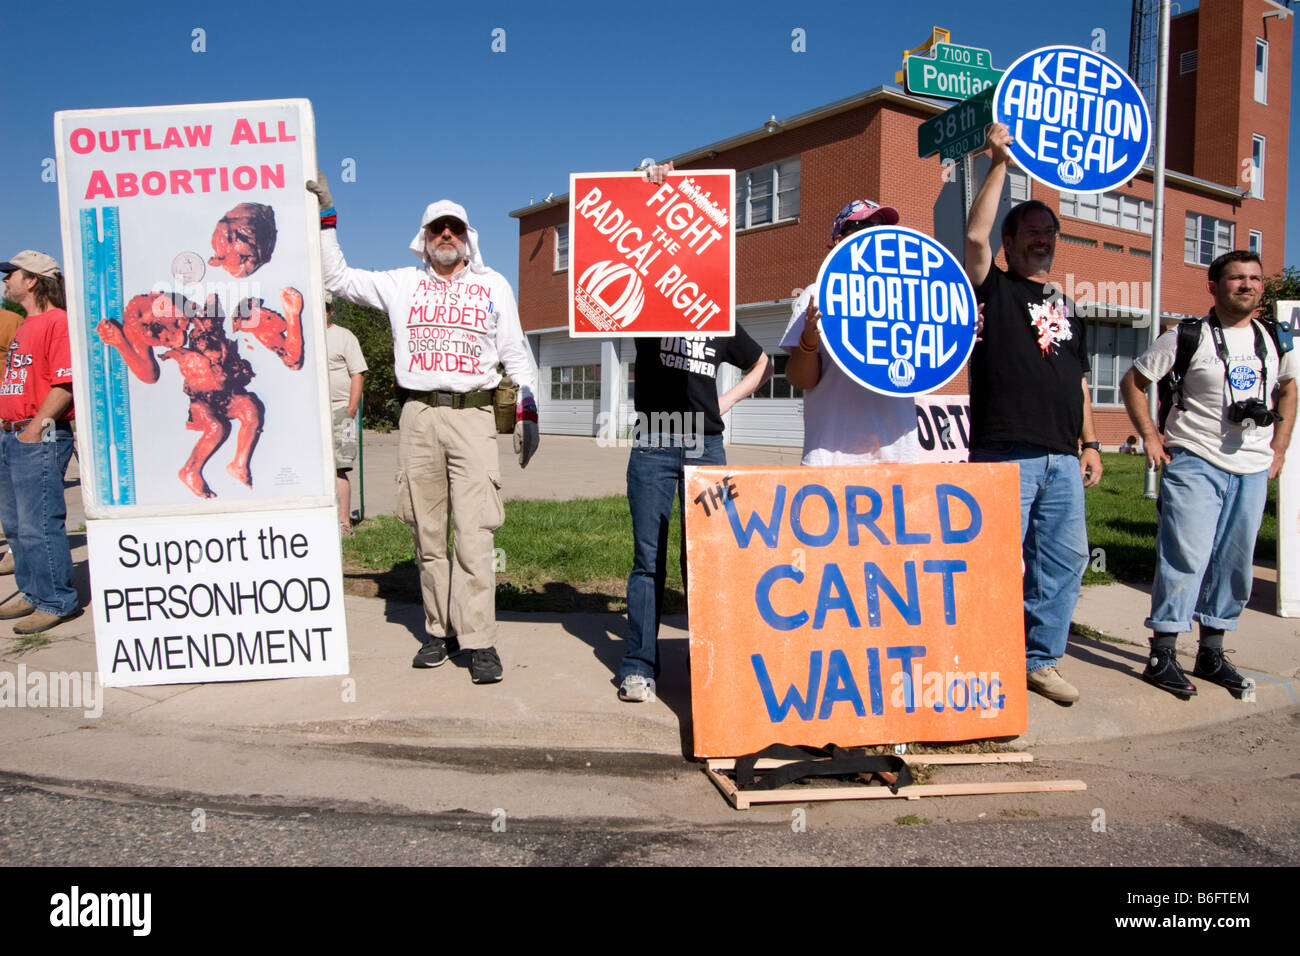 Pro-Choice protesters and pro-life protesters demonstrate in front of Planned Parenthood in Denver, Colorado Stock Photo